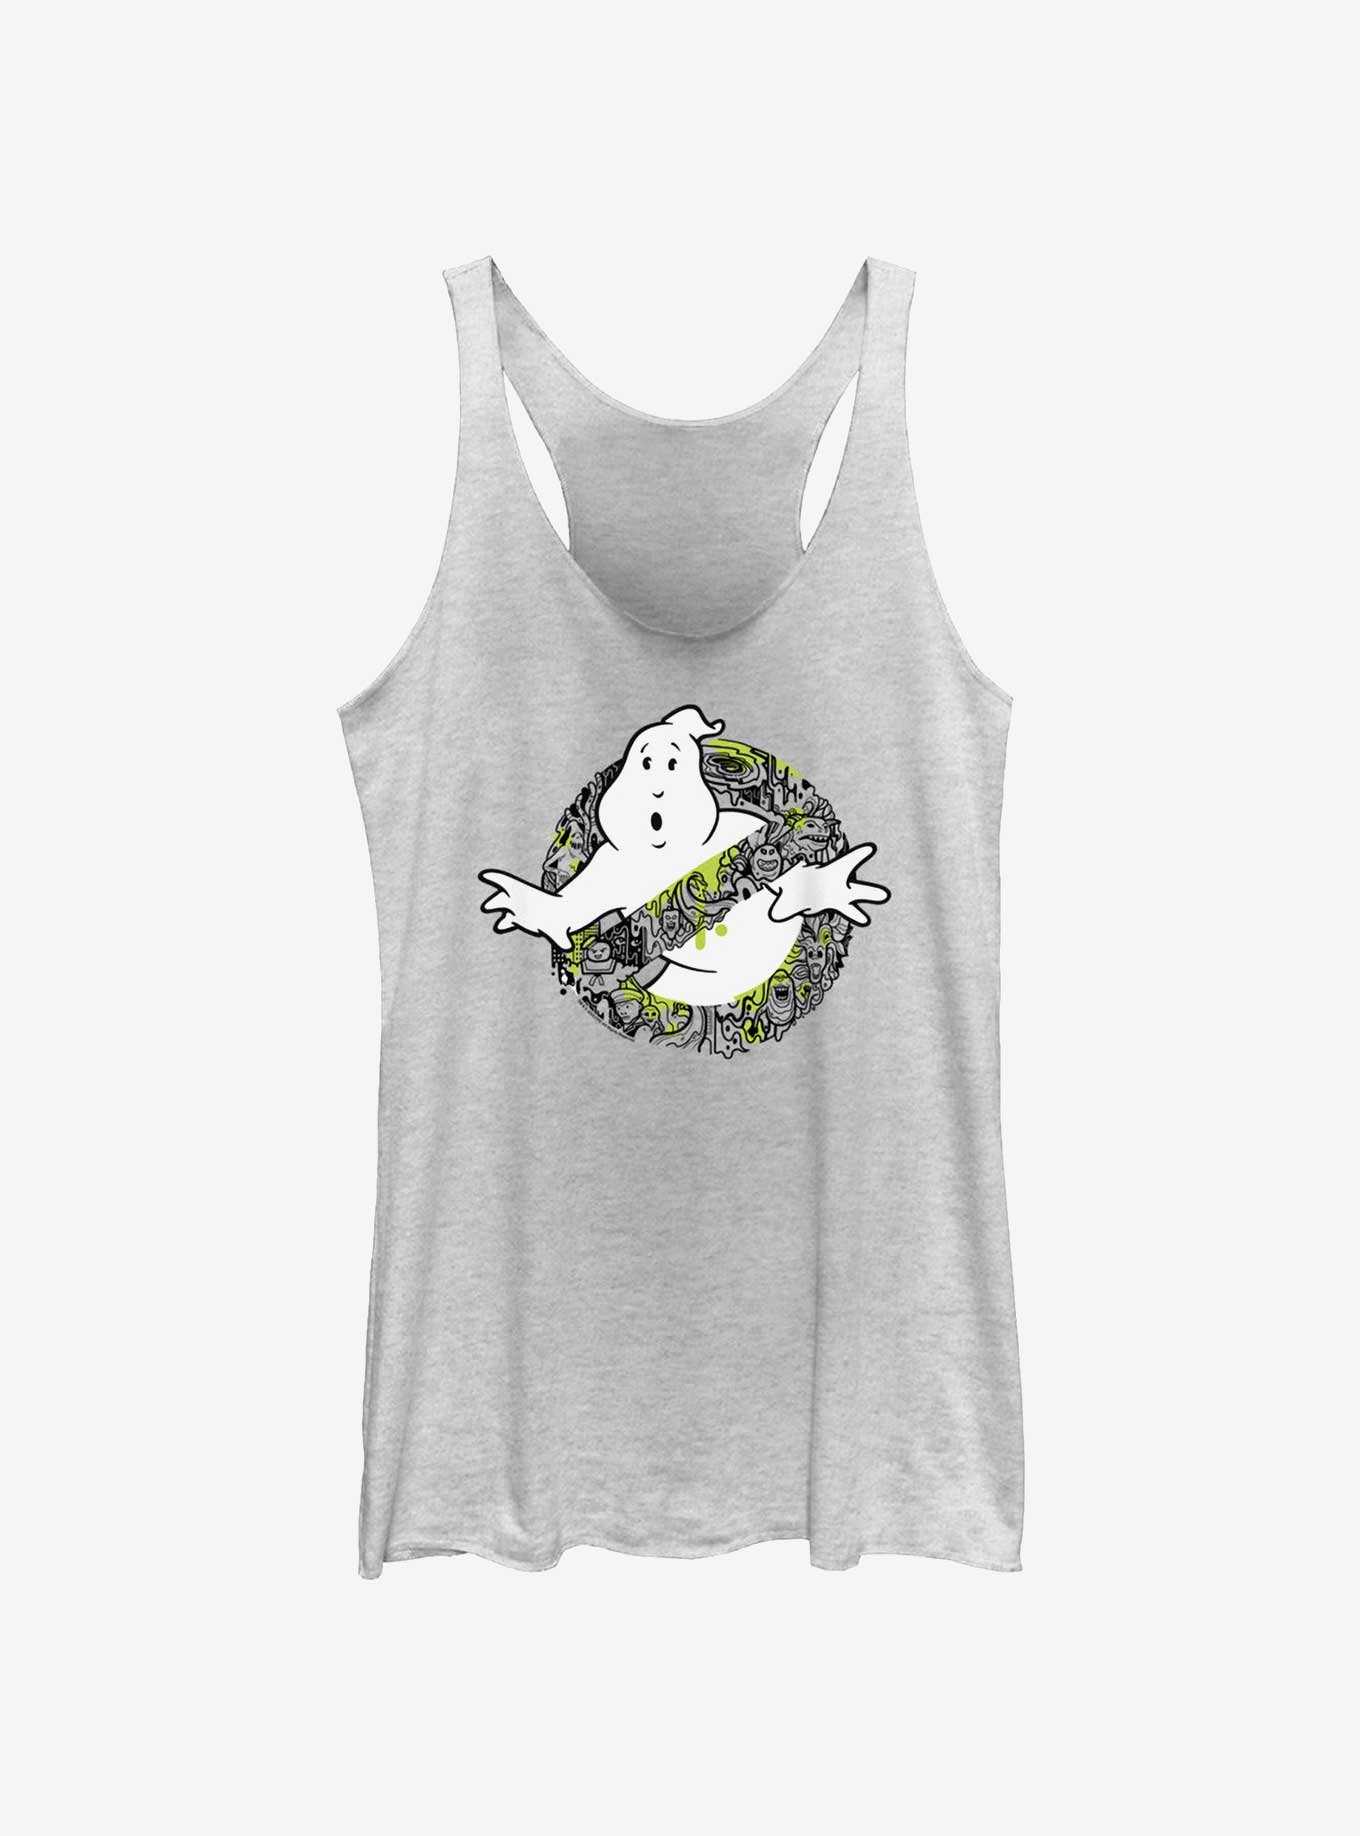 Ghostbusters: Frozen Empire Busting Ghosts Womens Tank Top, , hi-res